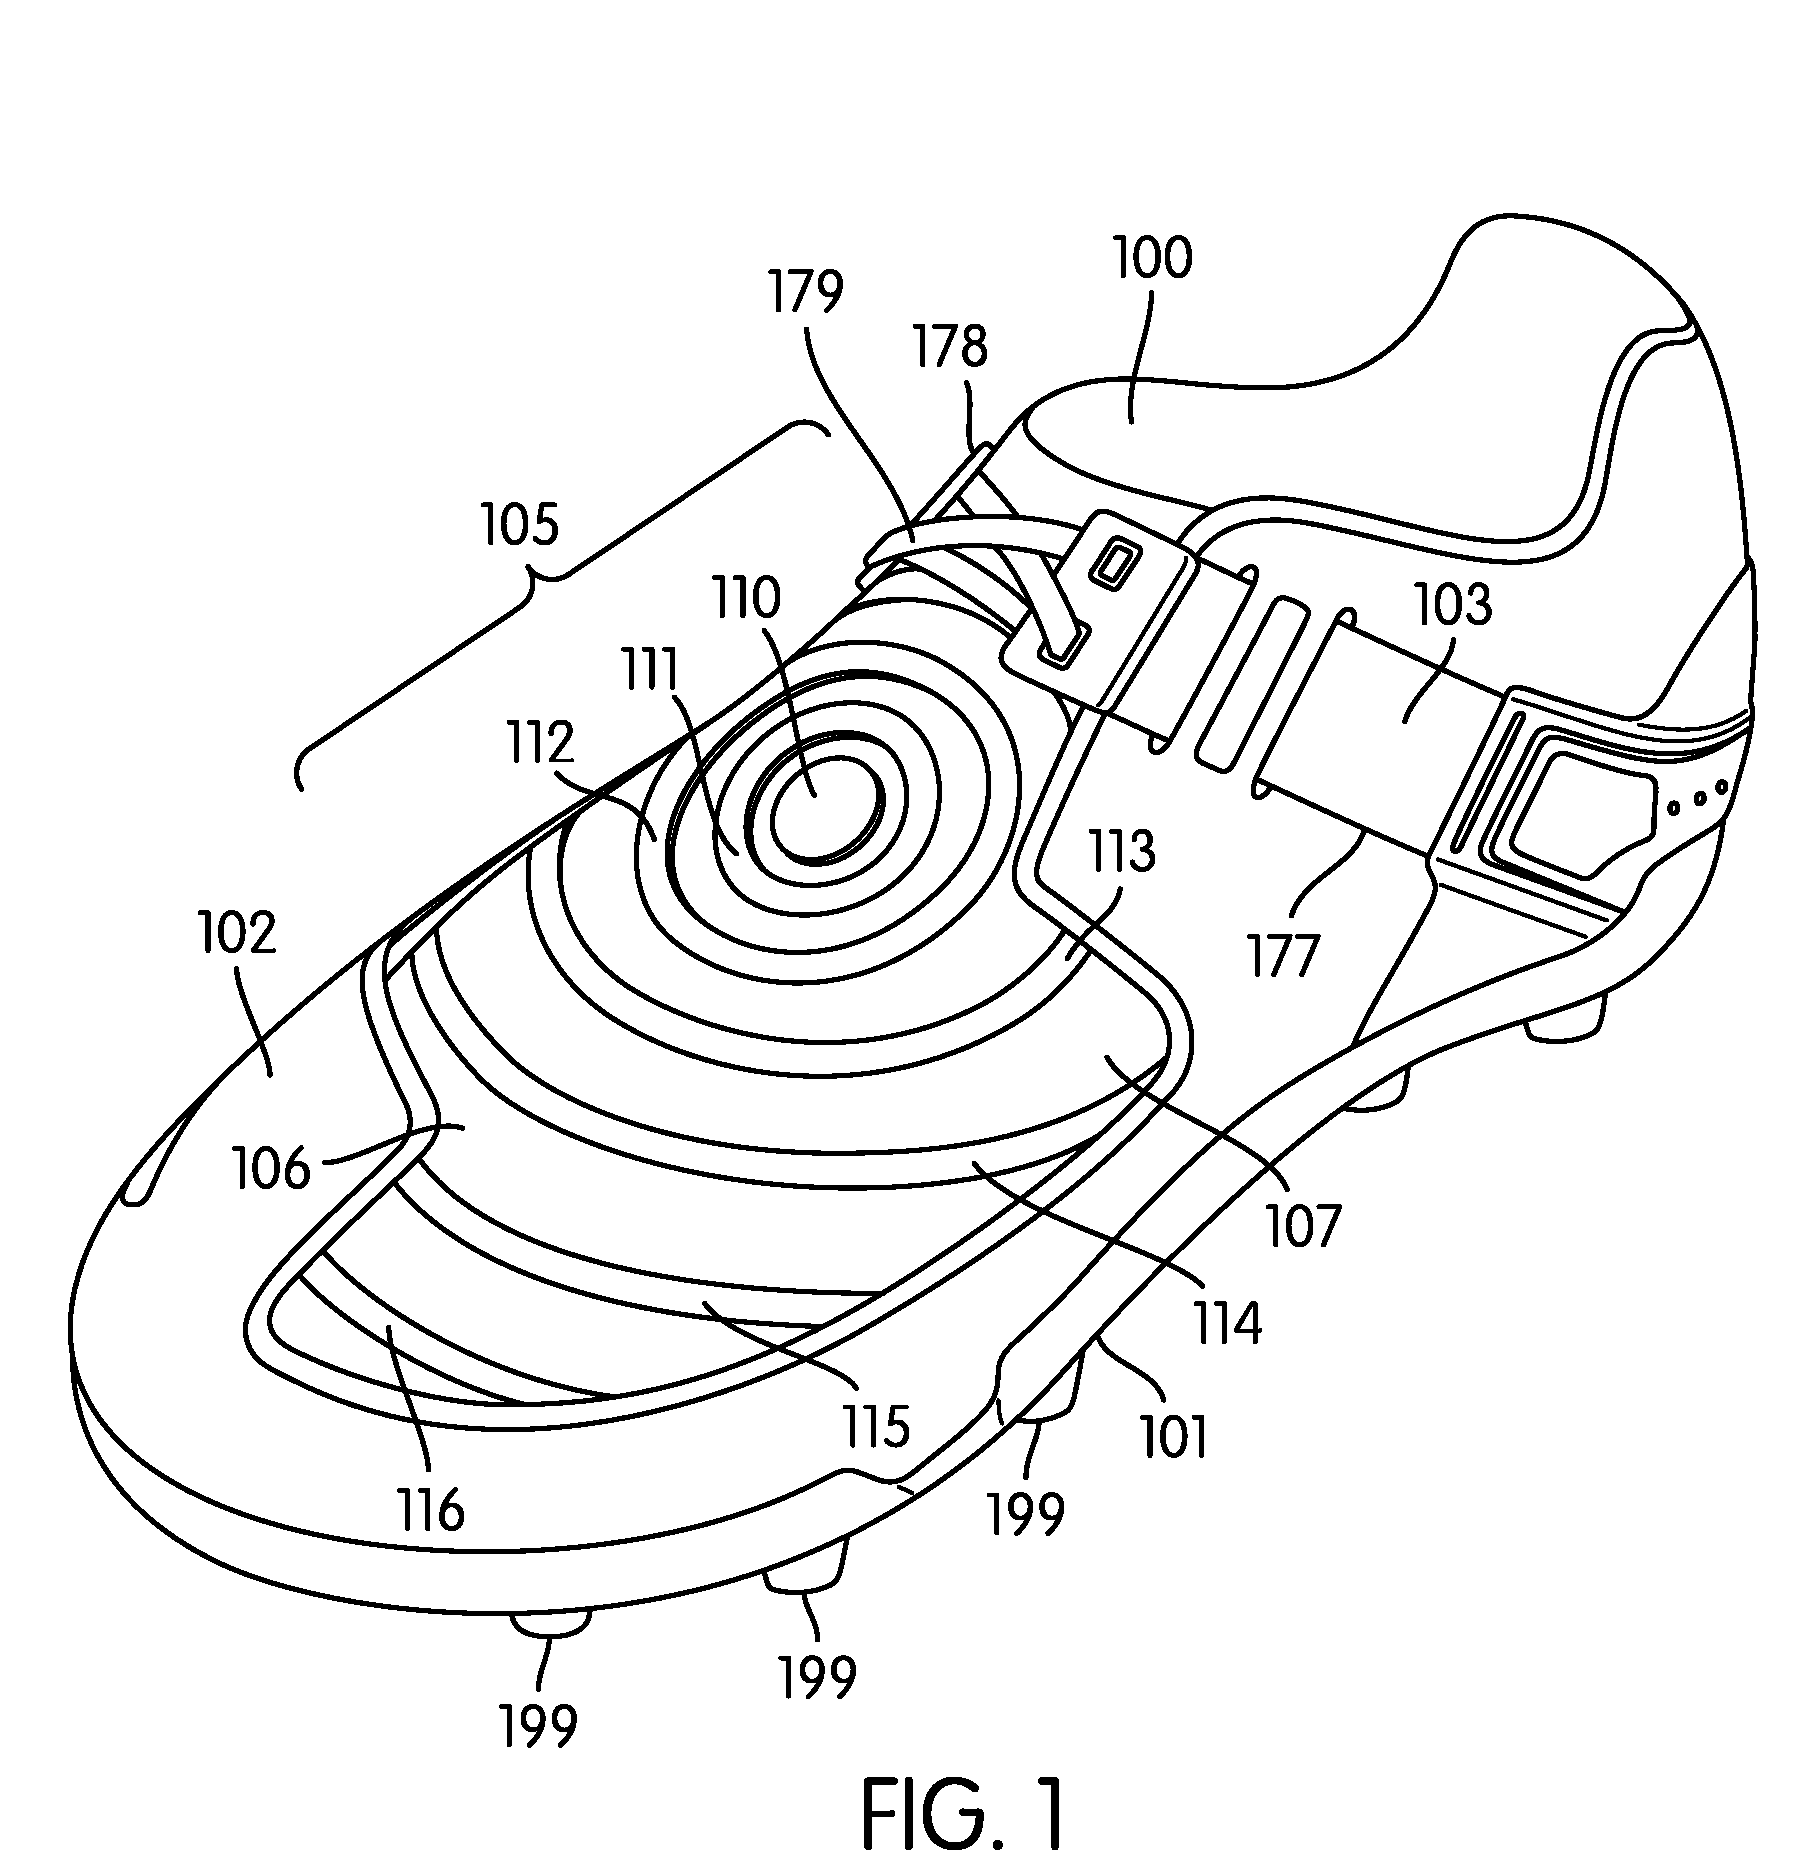 Article of footwear with gripping system